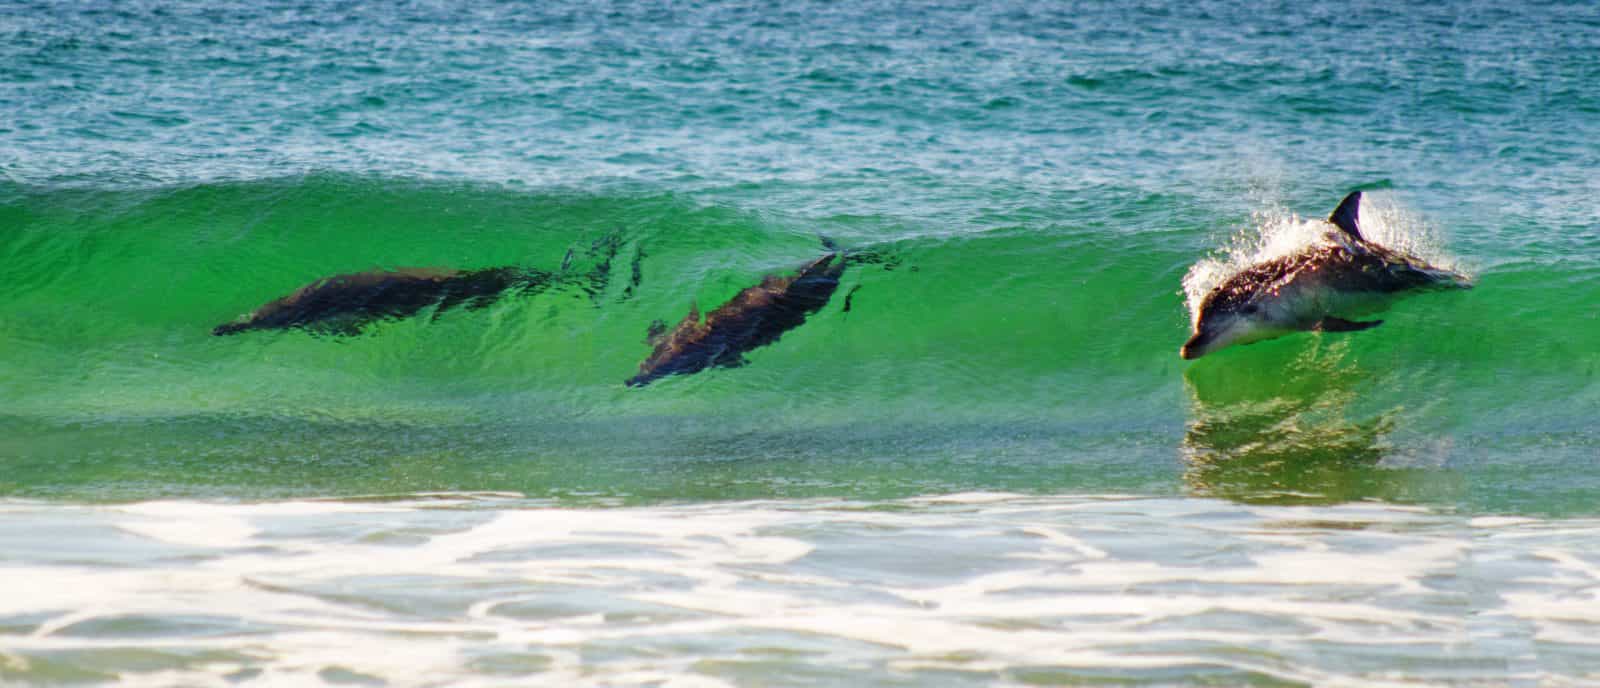 Dolphins riding the waves at Dolphin Beach, Moruya Heads